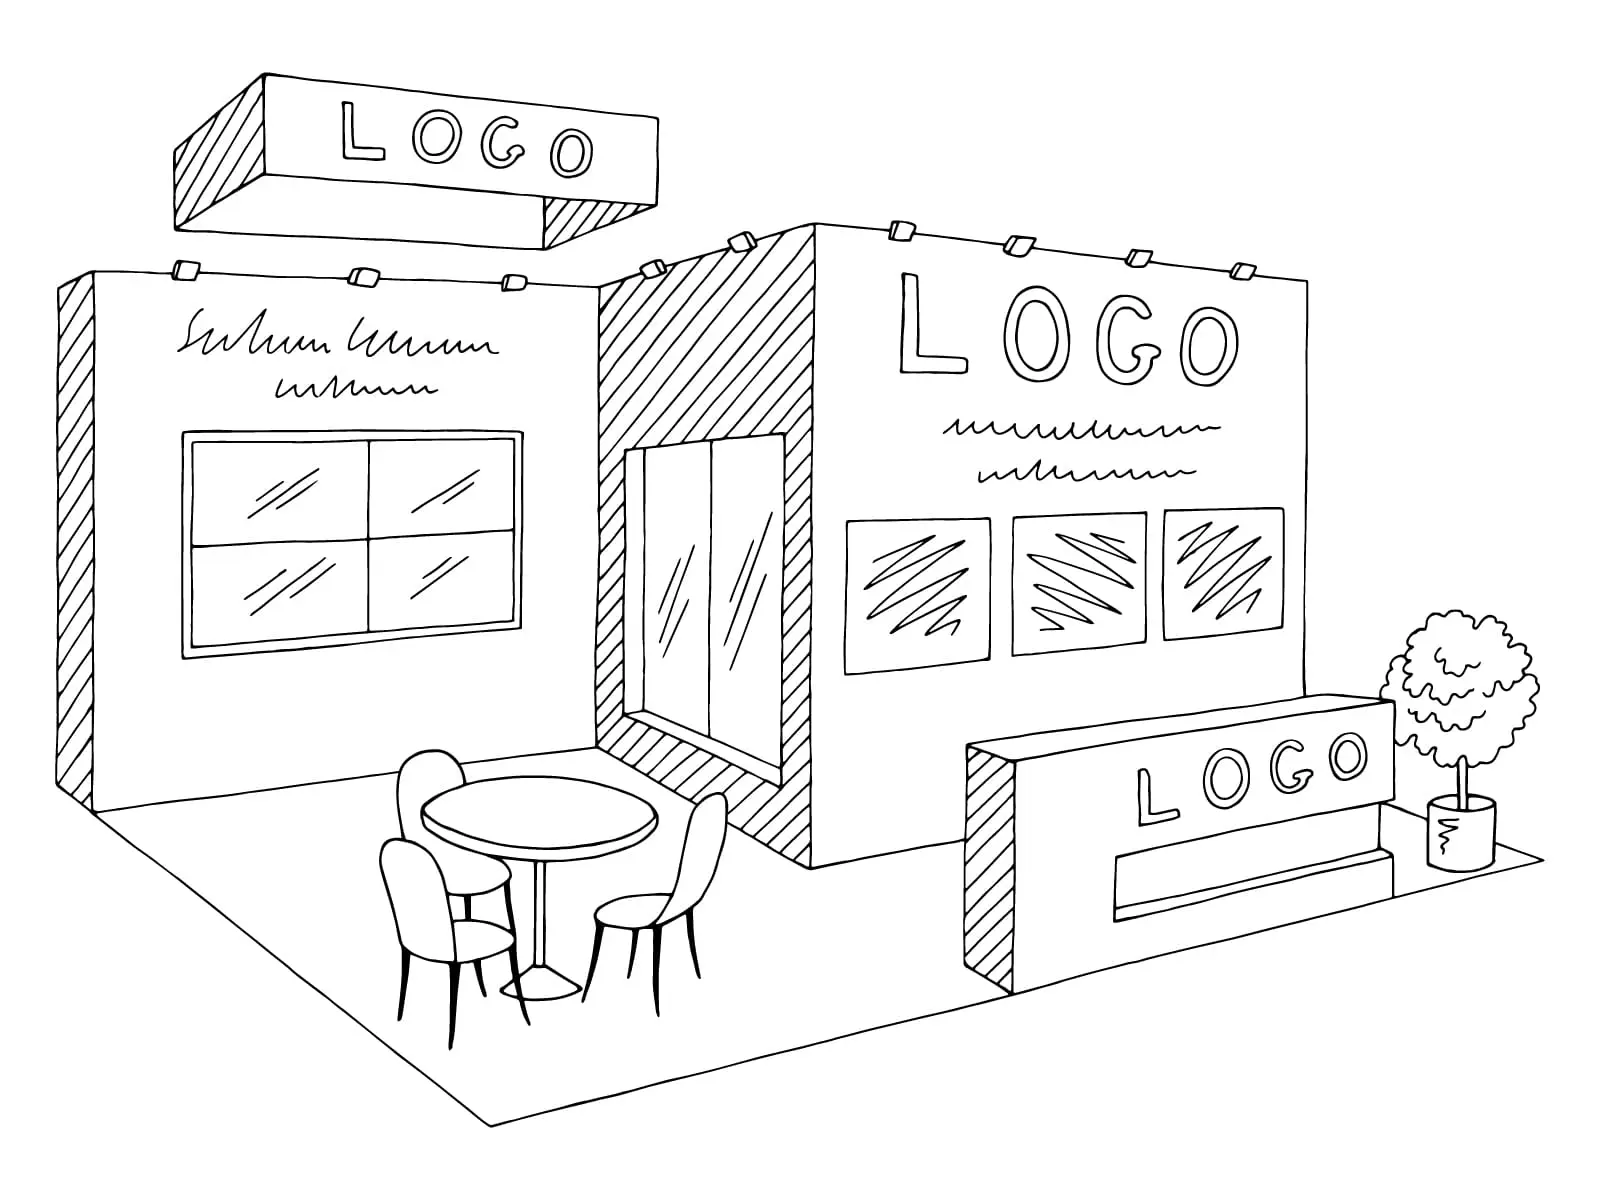 Designing your trade show booth